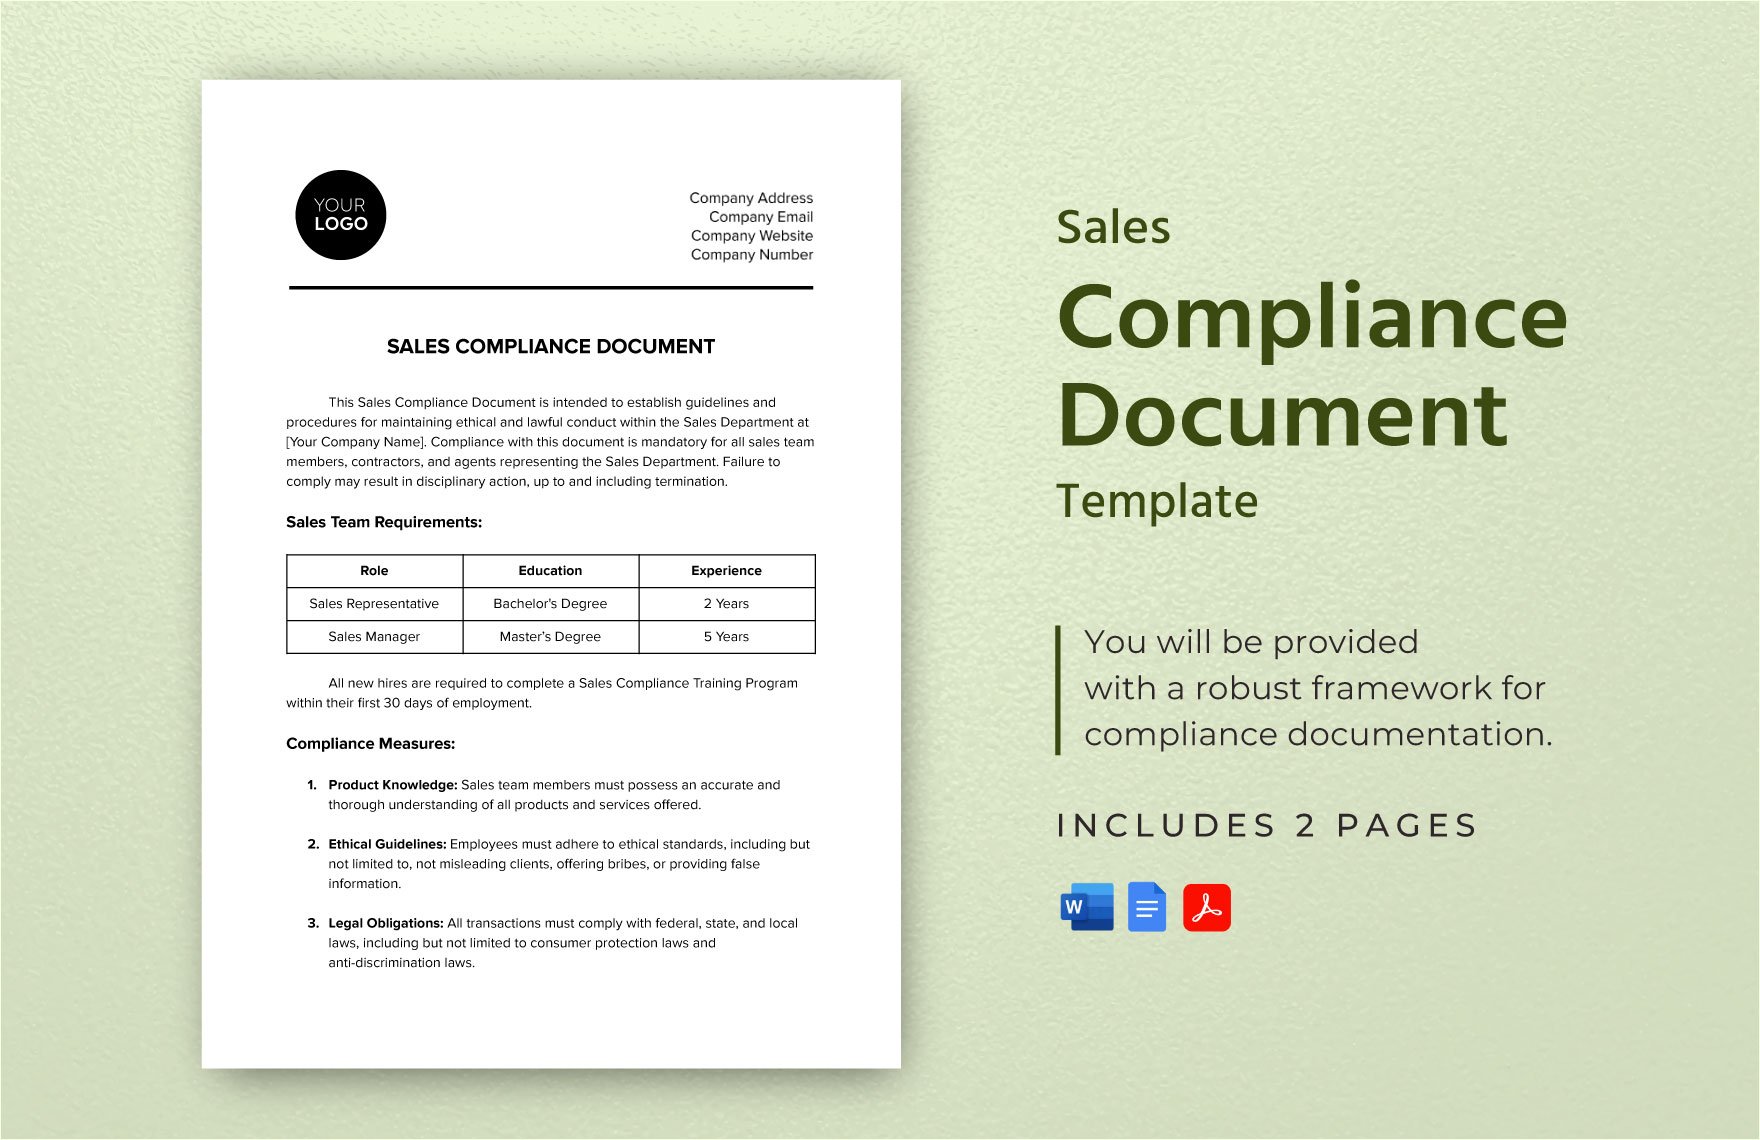 Sales Compliance Document Template in Word, Google Docs, PDF